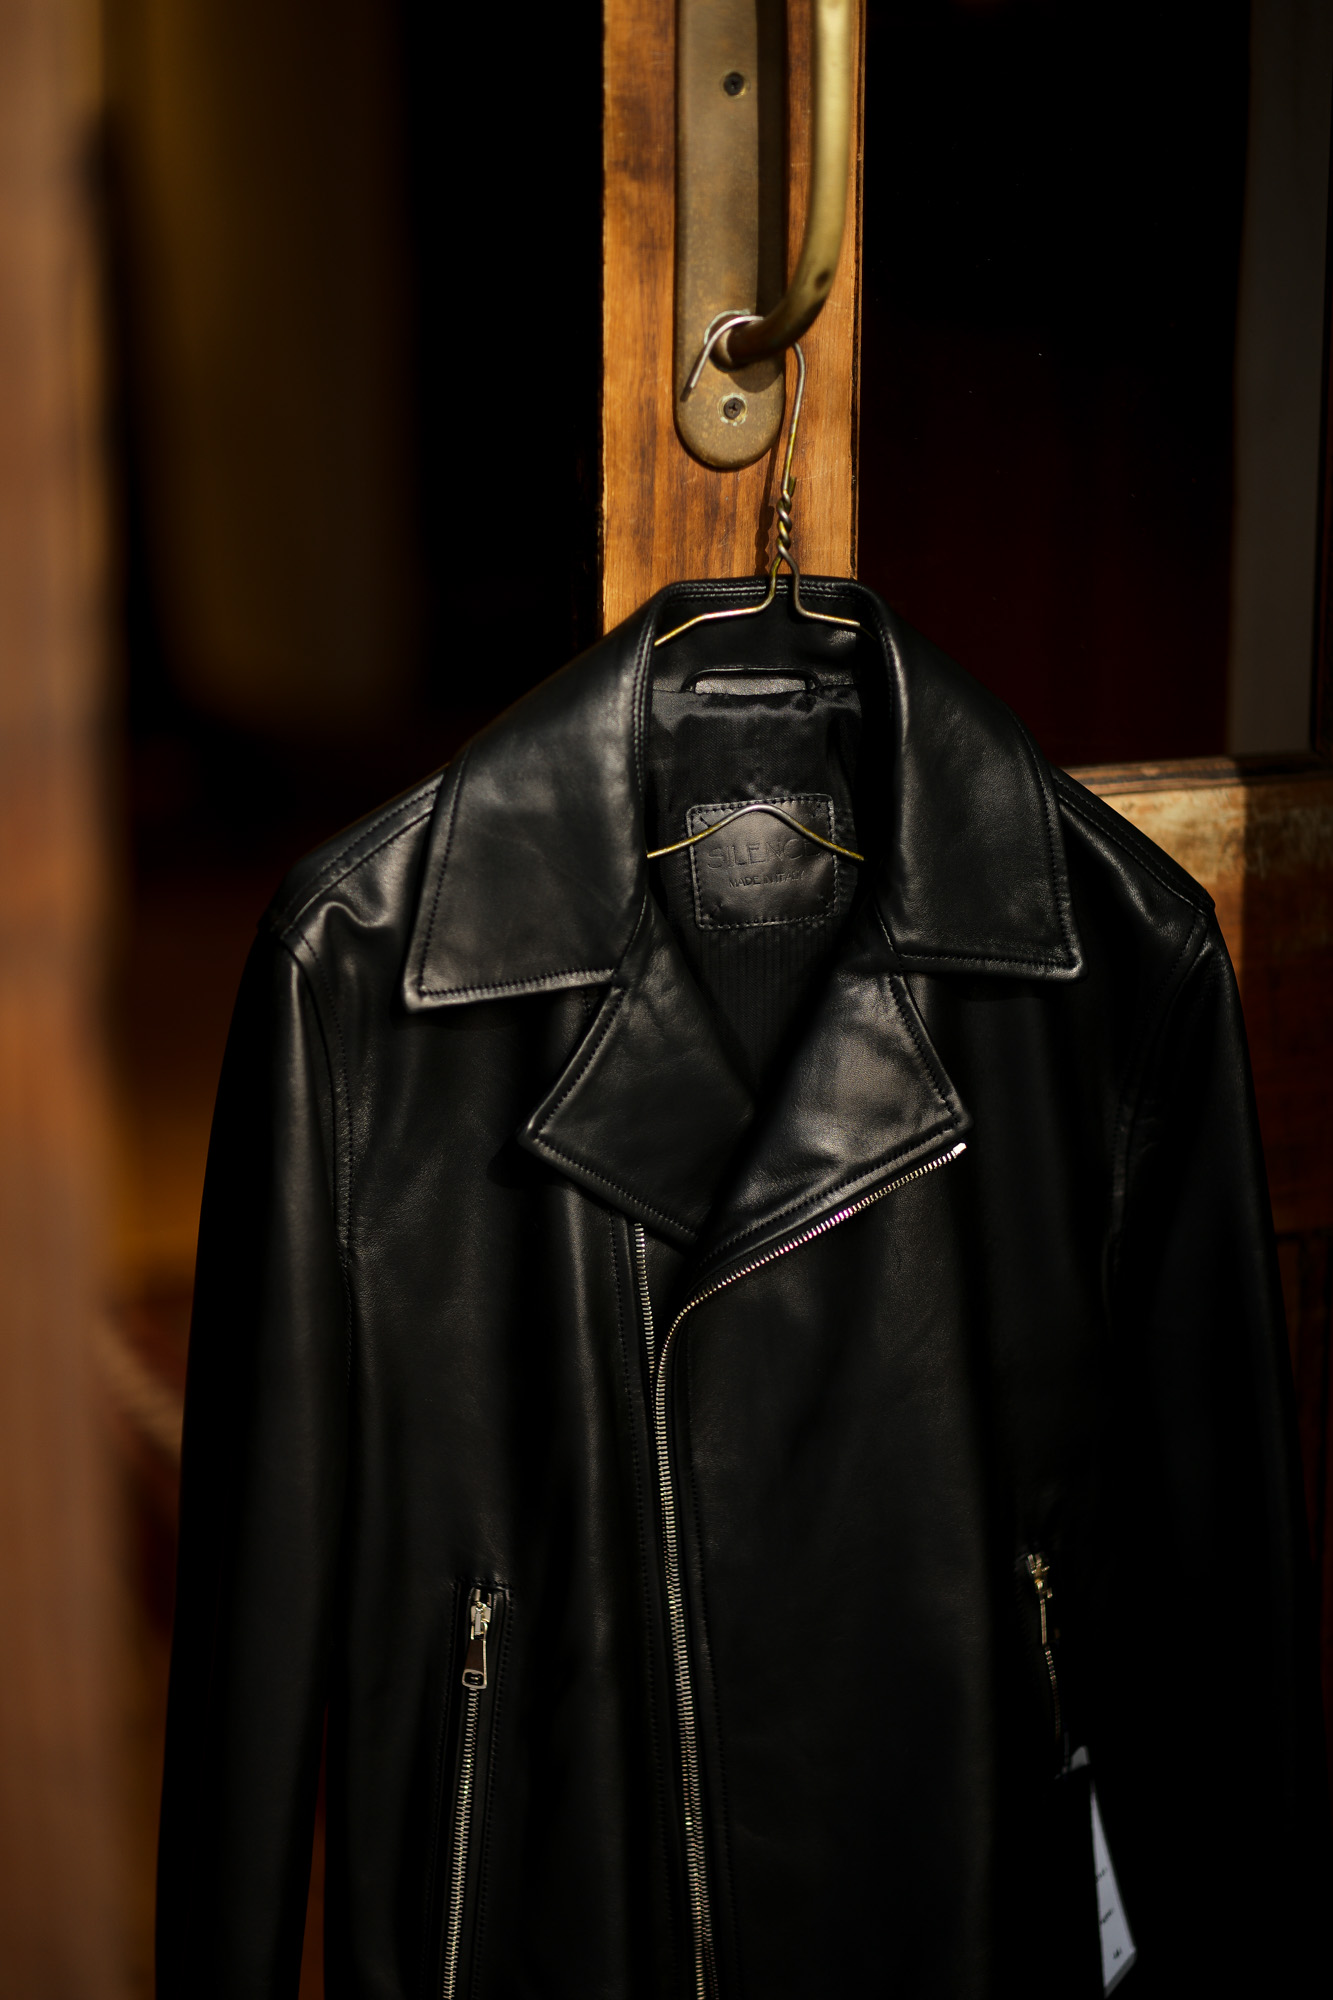 SILENCE (サイレンス) Double Riders Jacket (ダブル ライダース ジャケット) Goatskin Leather ( ゴートスキンレザー) GOLD ZIP (ゴールドジップ) レザー ライダース ジャケット NERO GOLD ZIP (ブラックゴールドジップ)  Made in italy (イタリア製) 2021 春夏新作 – 正規 ...